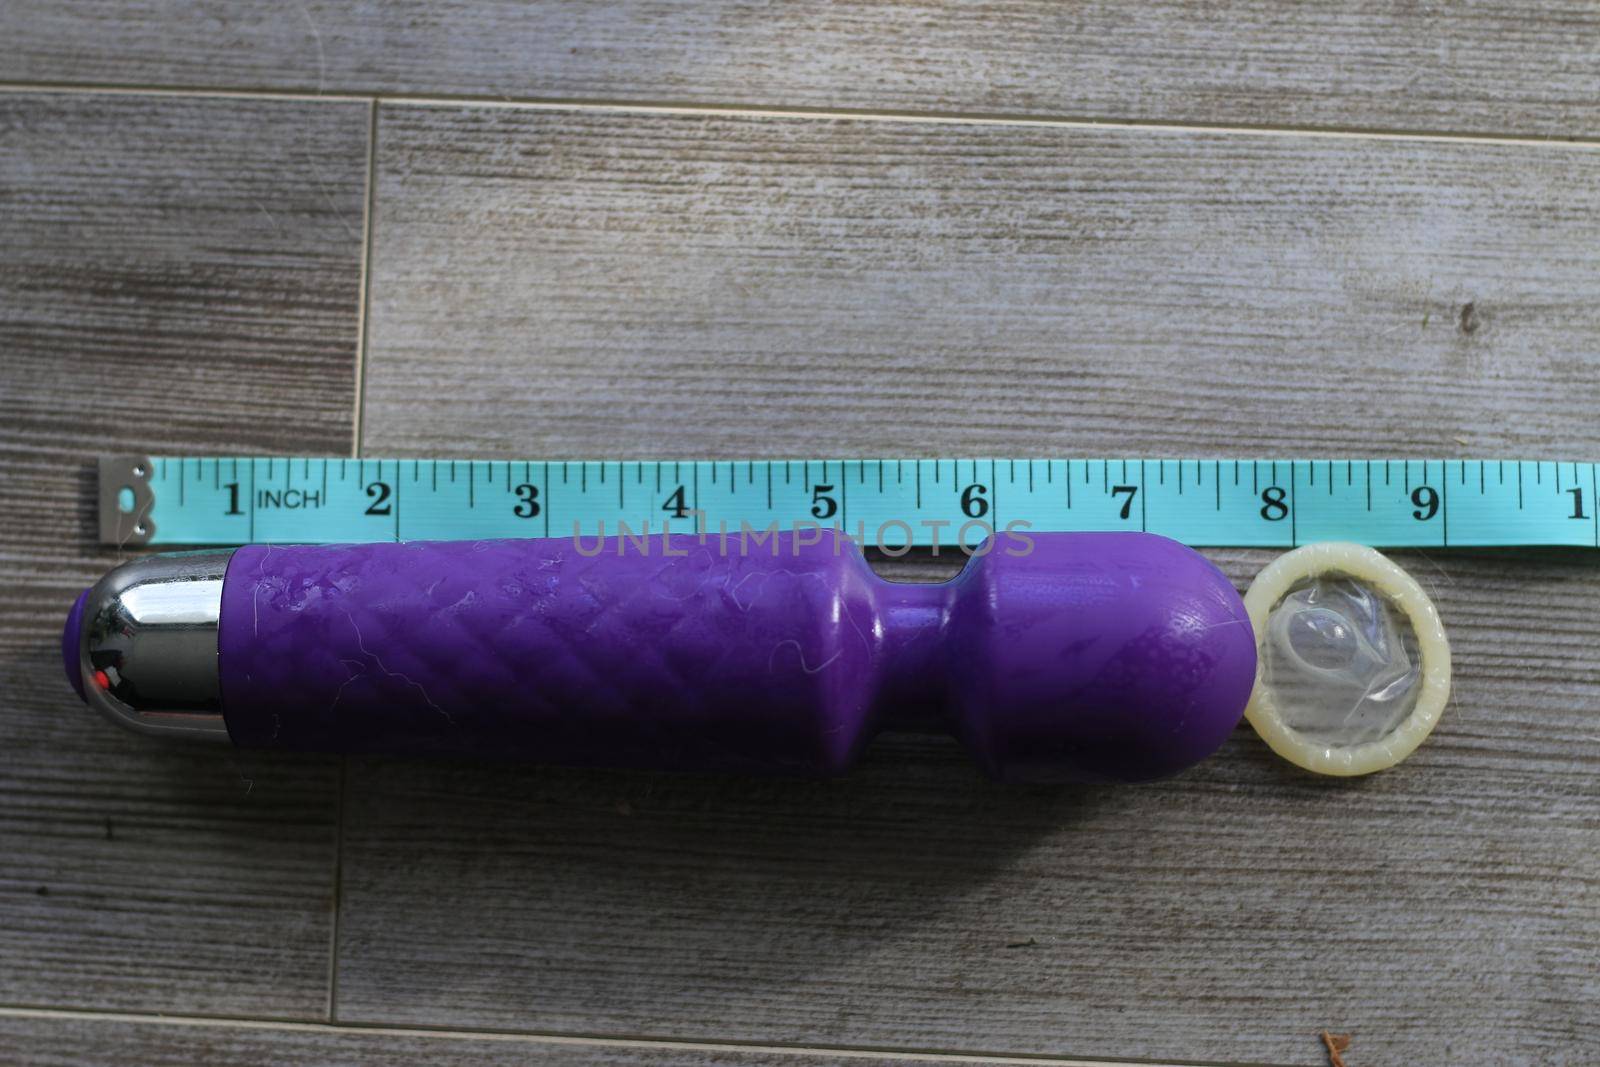 tape measurer next to a 7 inch dildo showing size by mynewturtle1